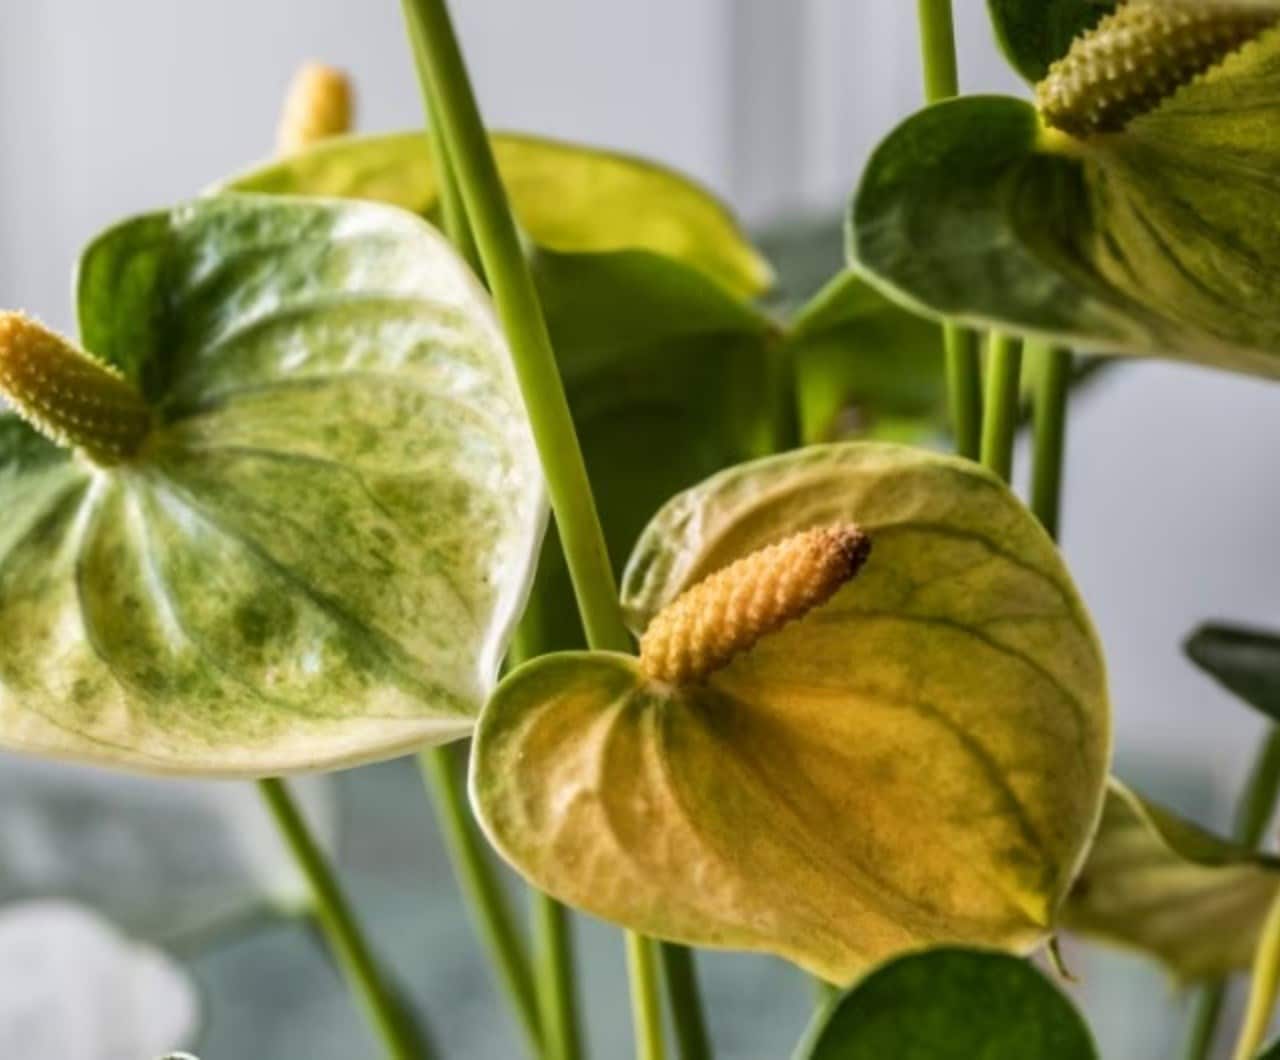 Easy care flowering houseplants for every home